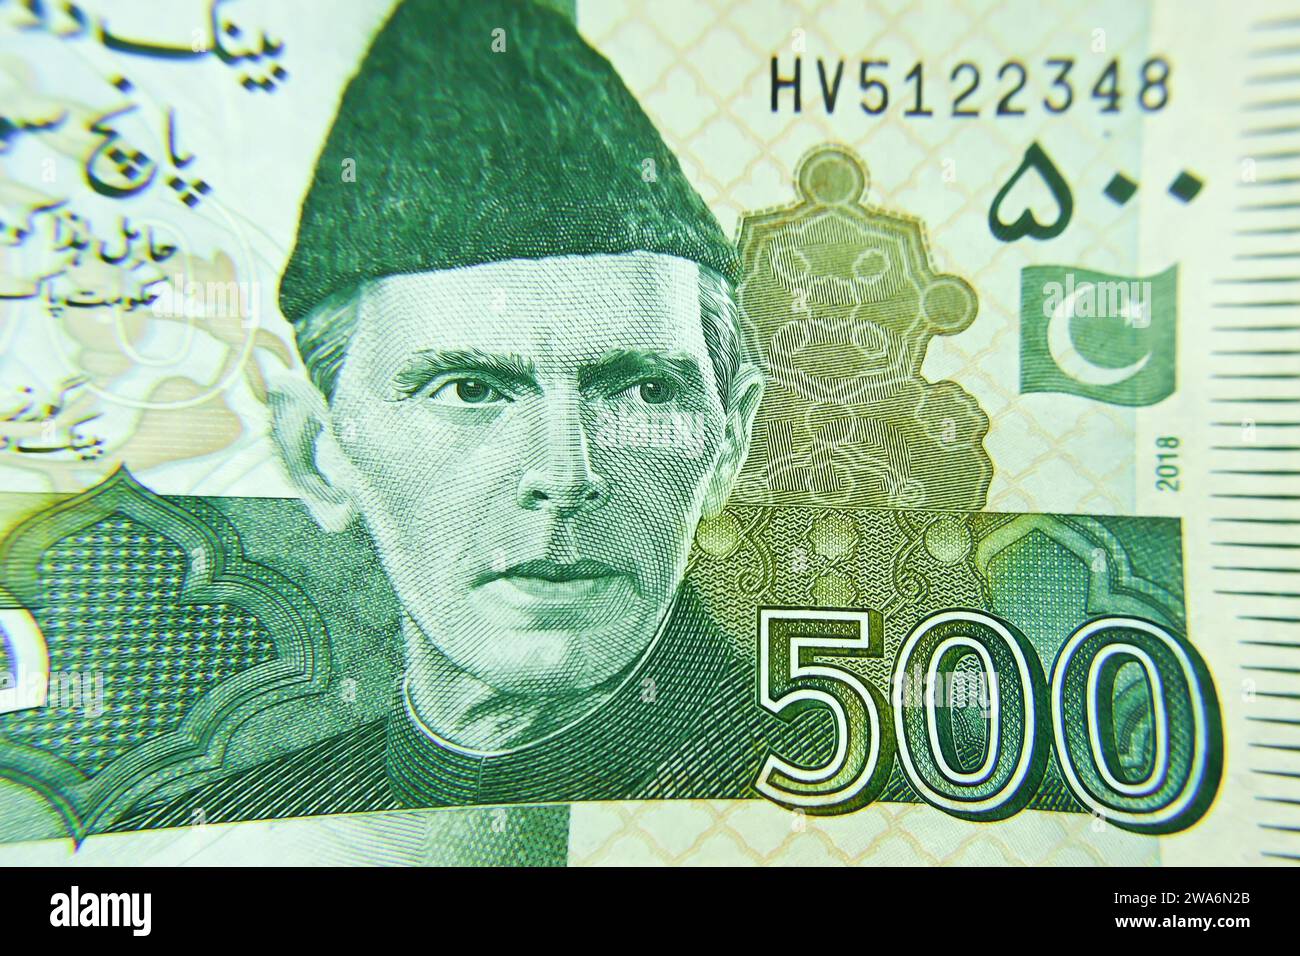 The Quaid-e-Azam Muhammad Ali Jinnah portrait from the Pakistan 500 banknote close up with selective focus Stock Photo